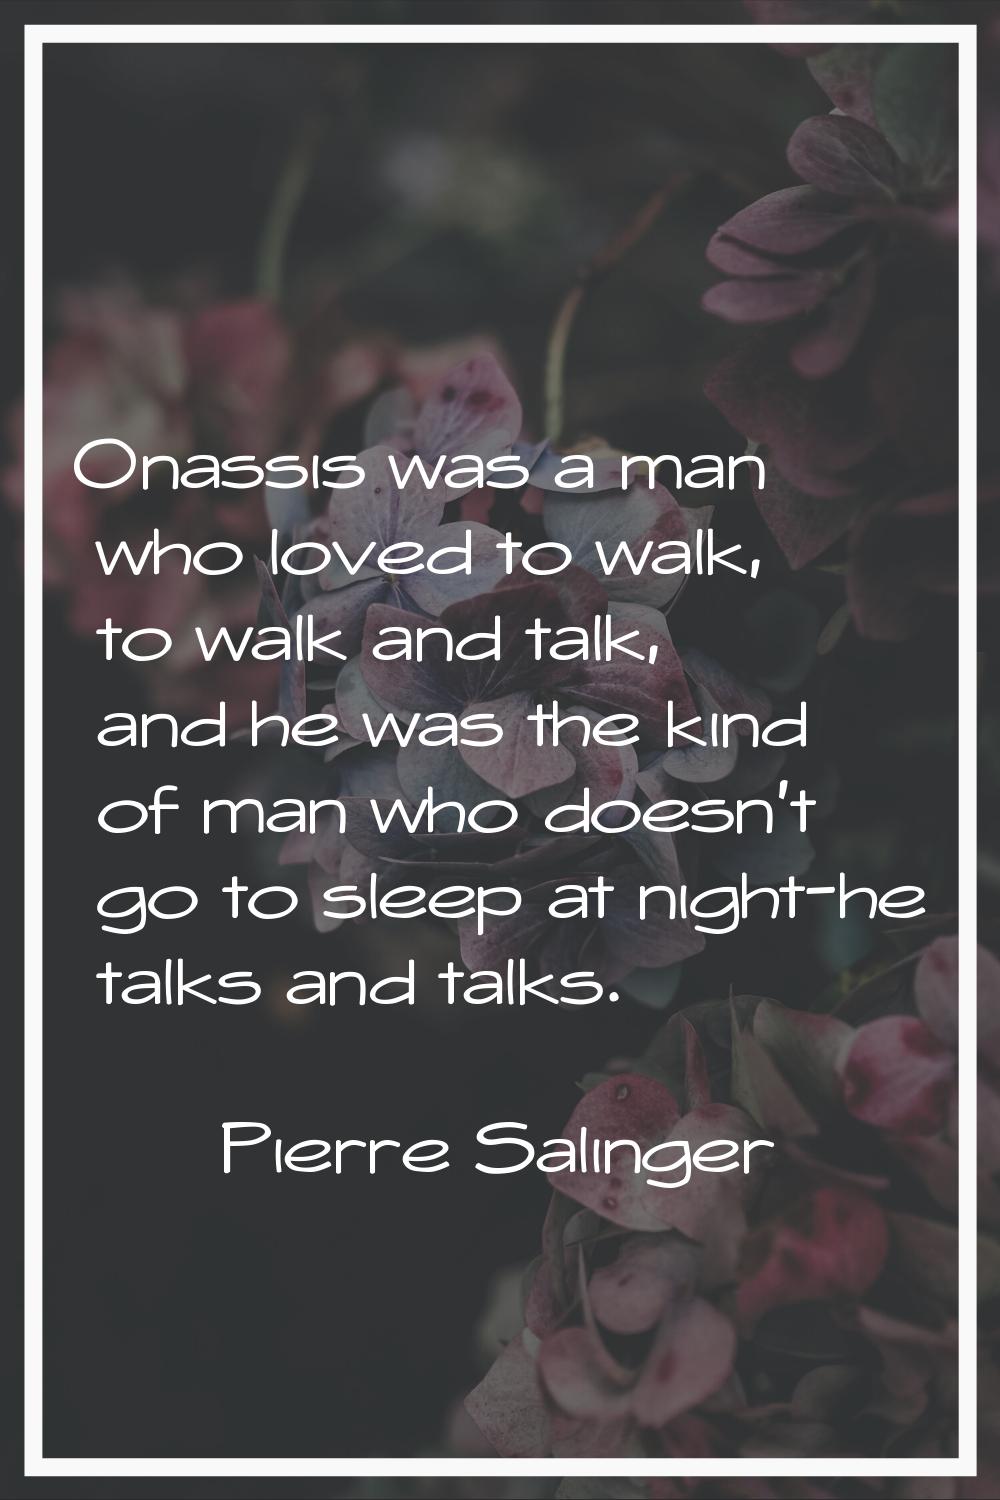 Onassis was a man who loved to walk, to walk and talk, and he was the kind of man who doesn't go to